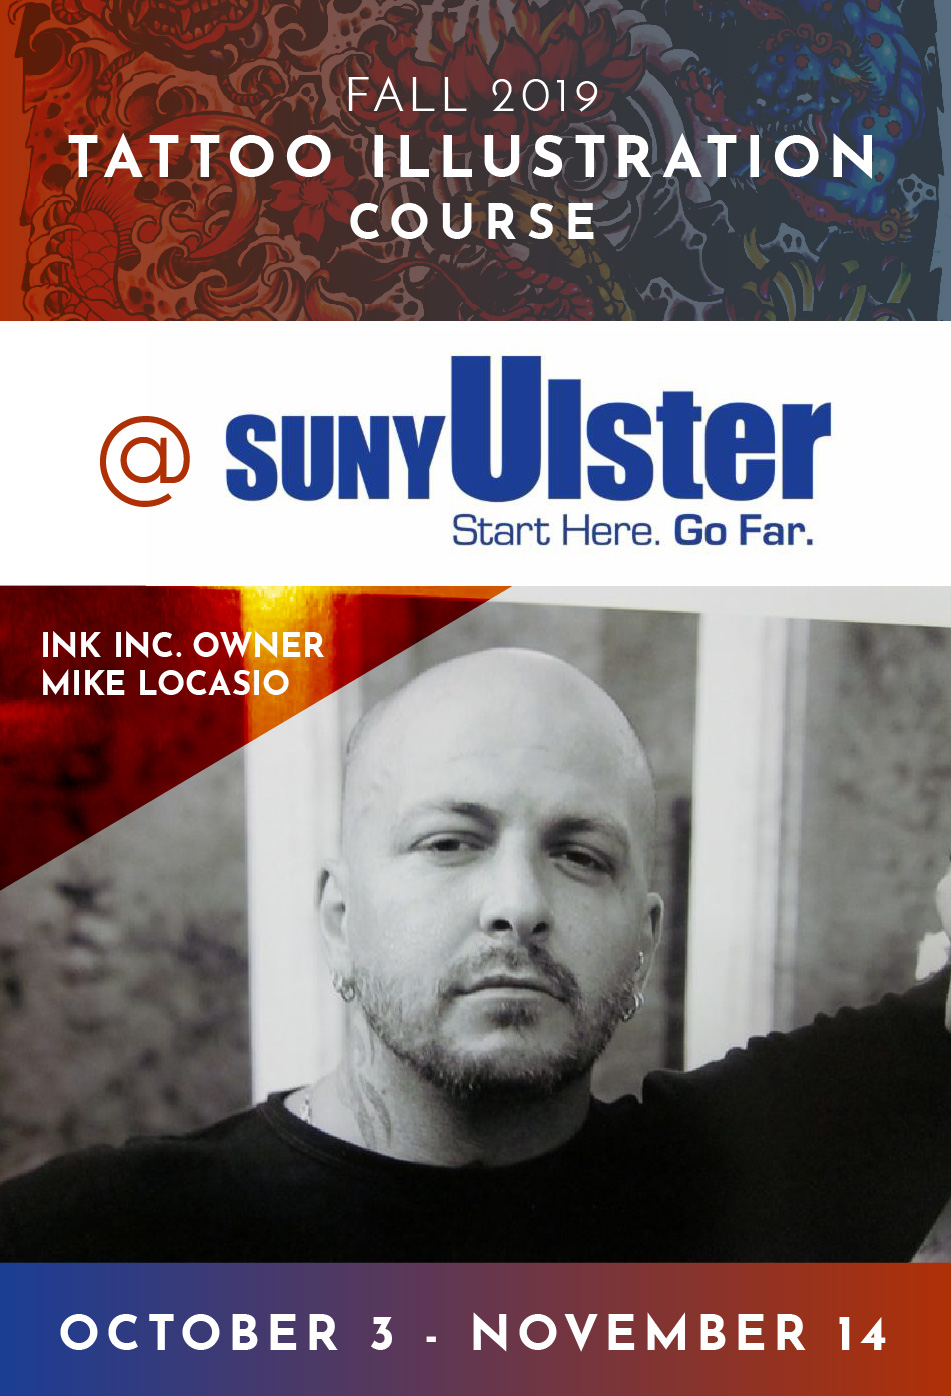 Fall 2019 Tattoo Illustration Course at SUNY Ulster start here. Go Far. Ink Inc. Owner Mike Locasio October 3 - November 14